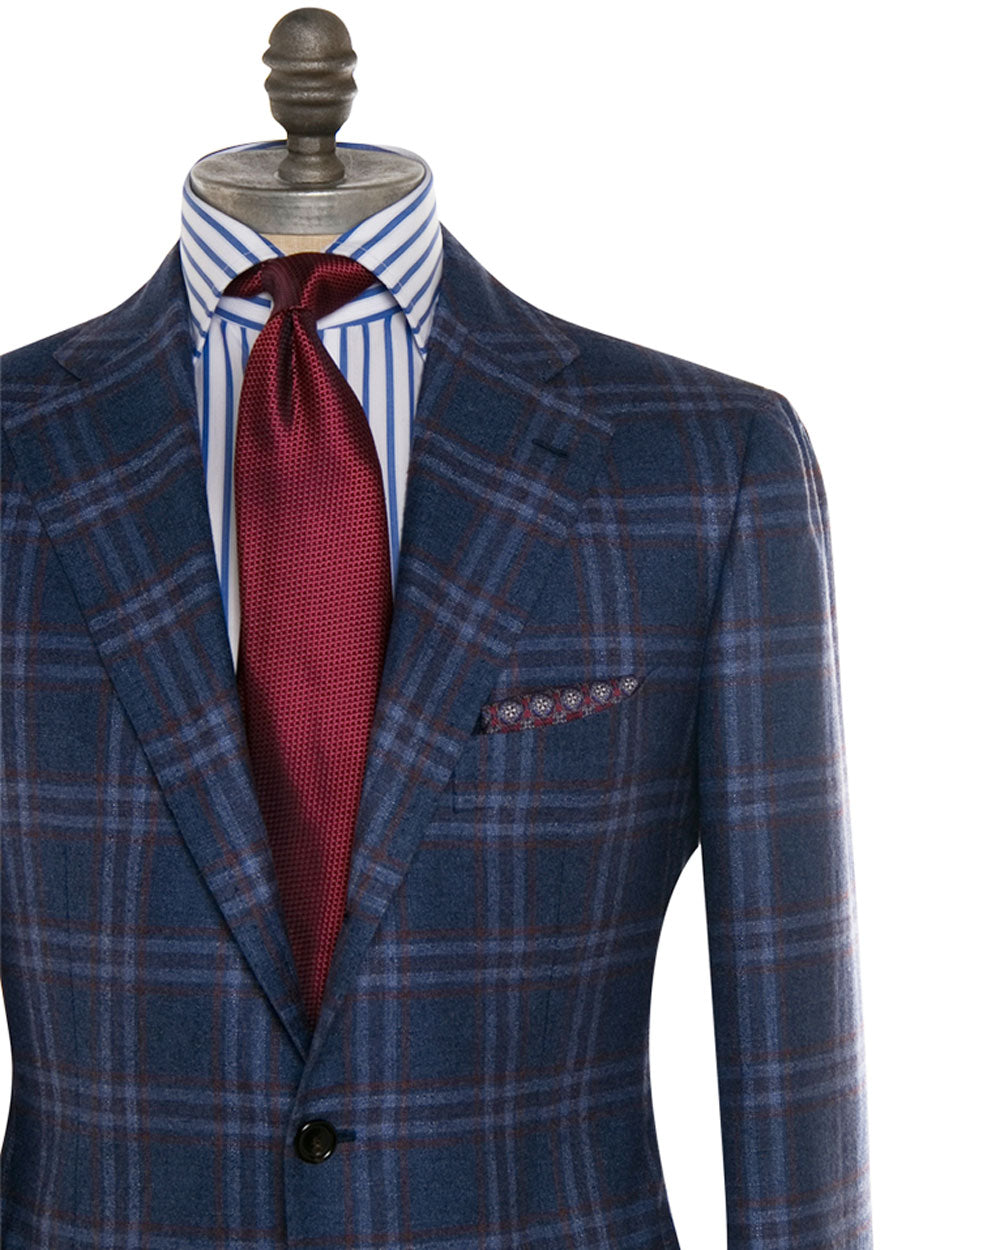 Blue and Rust Plaid Sportcoat